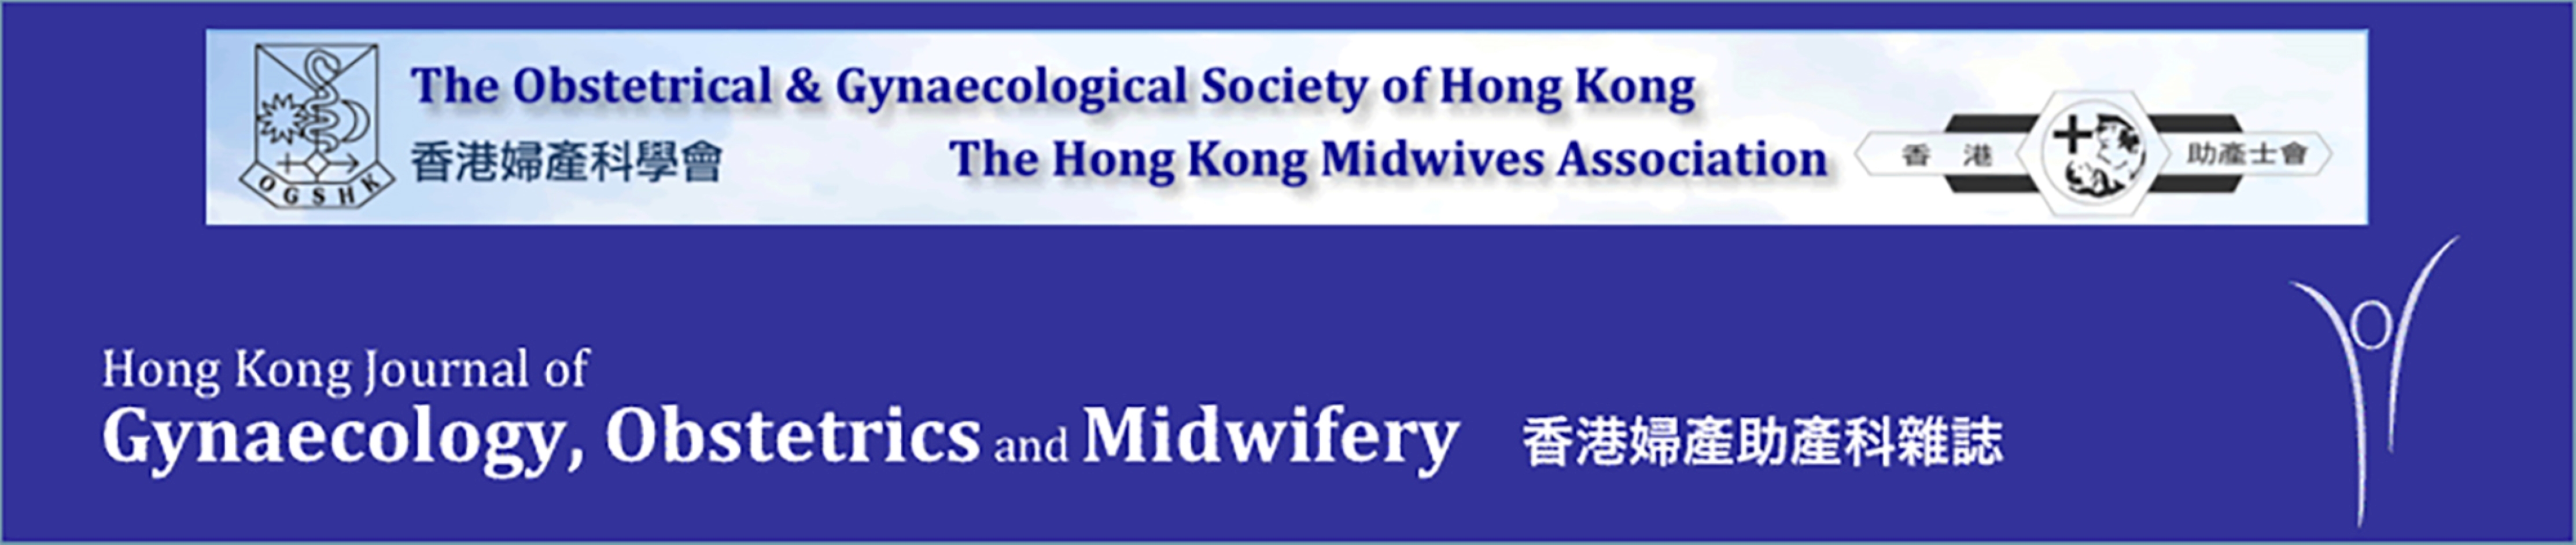 Hong Kong Journal of Gynaecology, Obstetrics and Midwifery